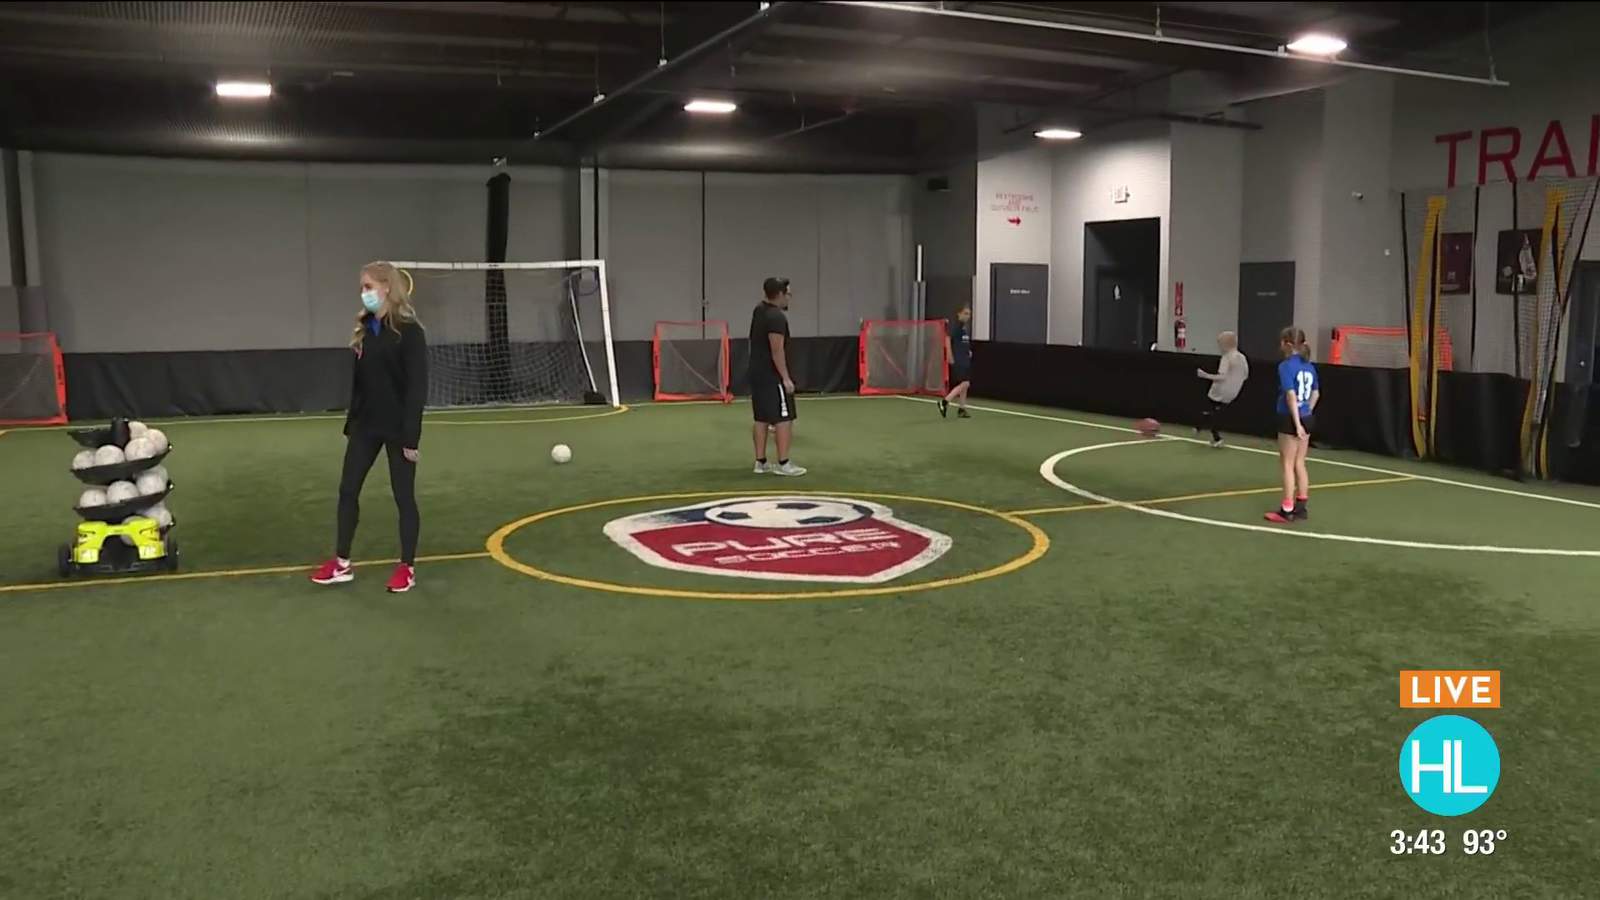 Pure Soccer Katy is an indoor soccer facility where kids and adults can train safely